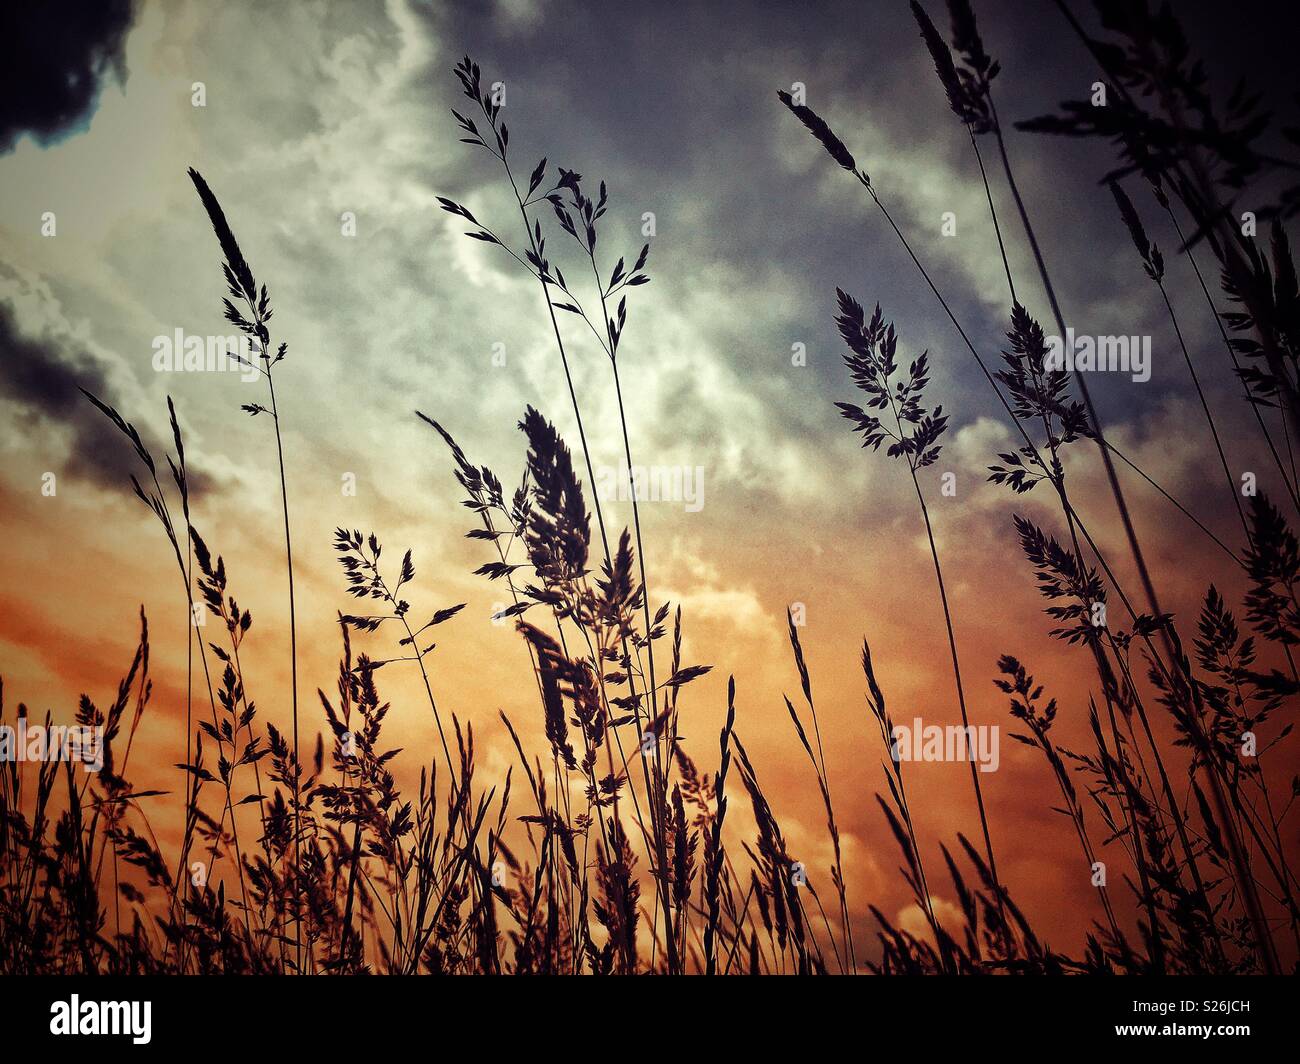 Silhouette of tall grass against a dramatic sky. Stock Photo